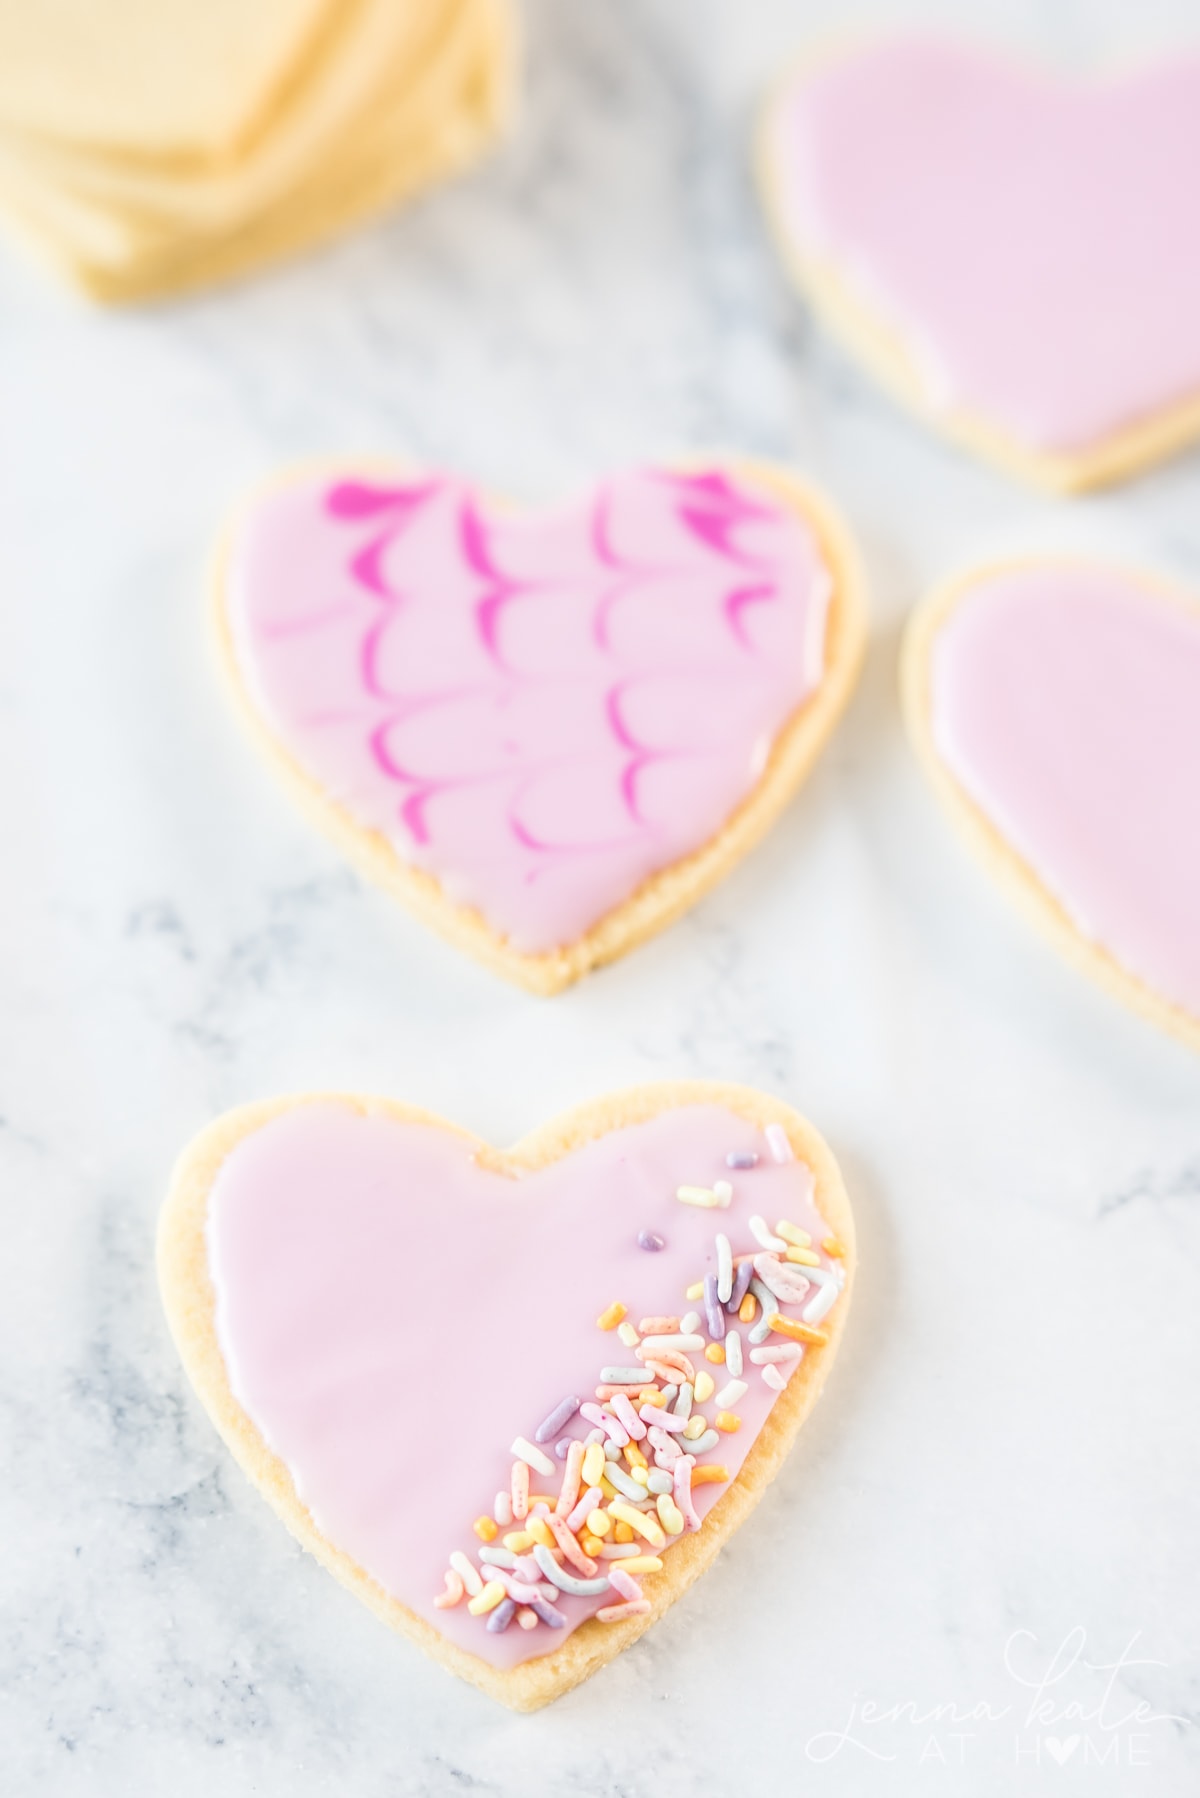 confectionary sugar icing recipe on heart shaped cookies